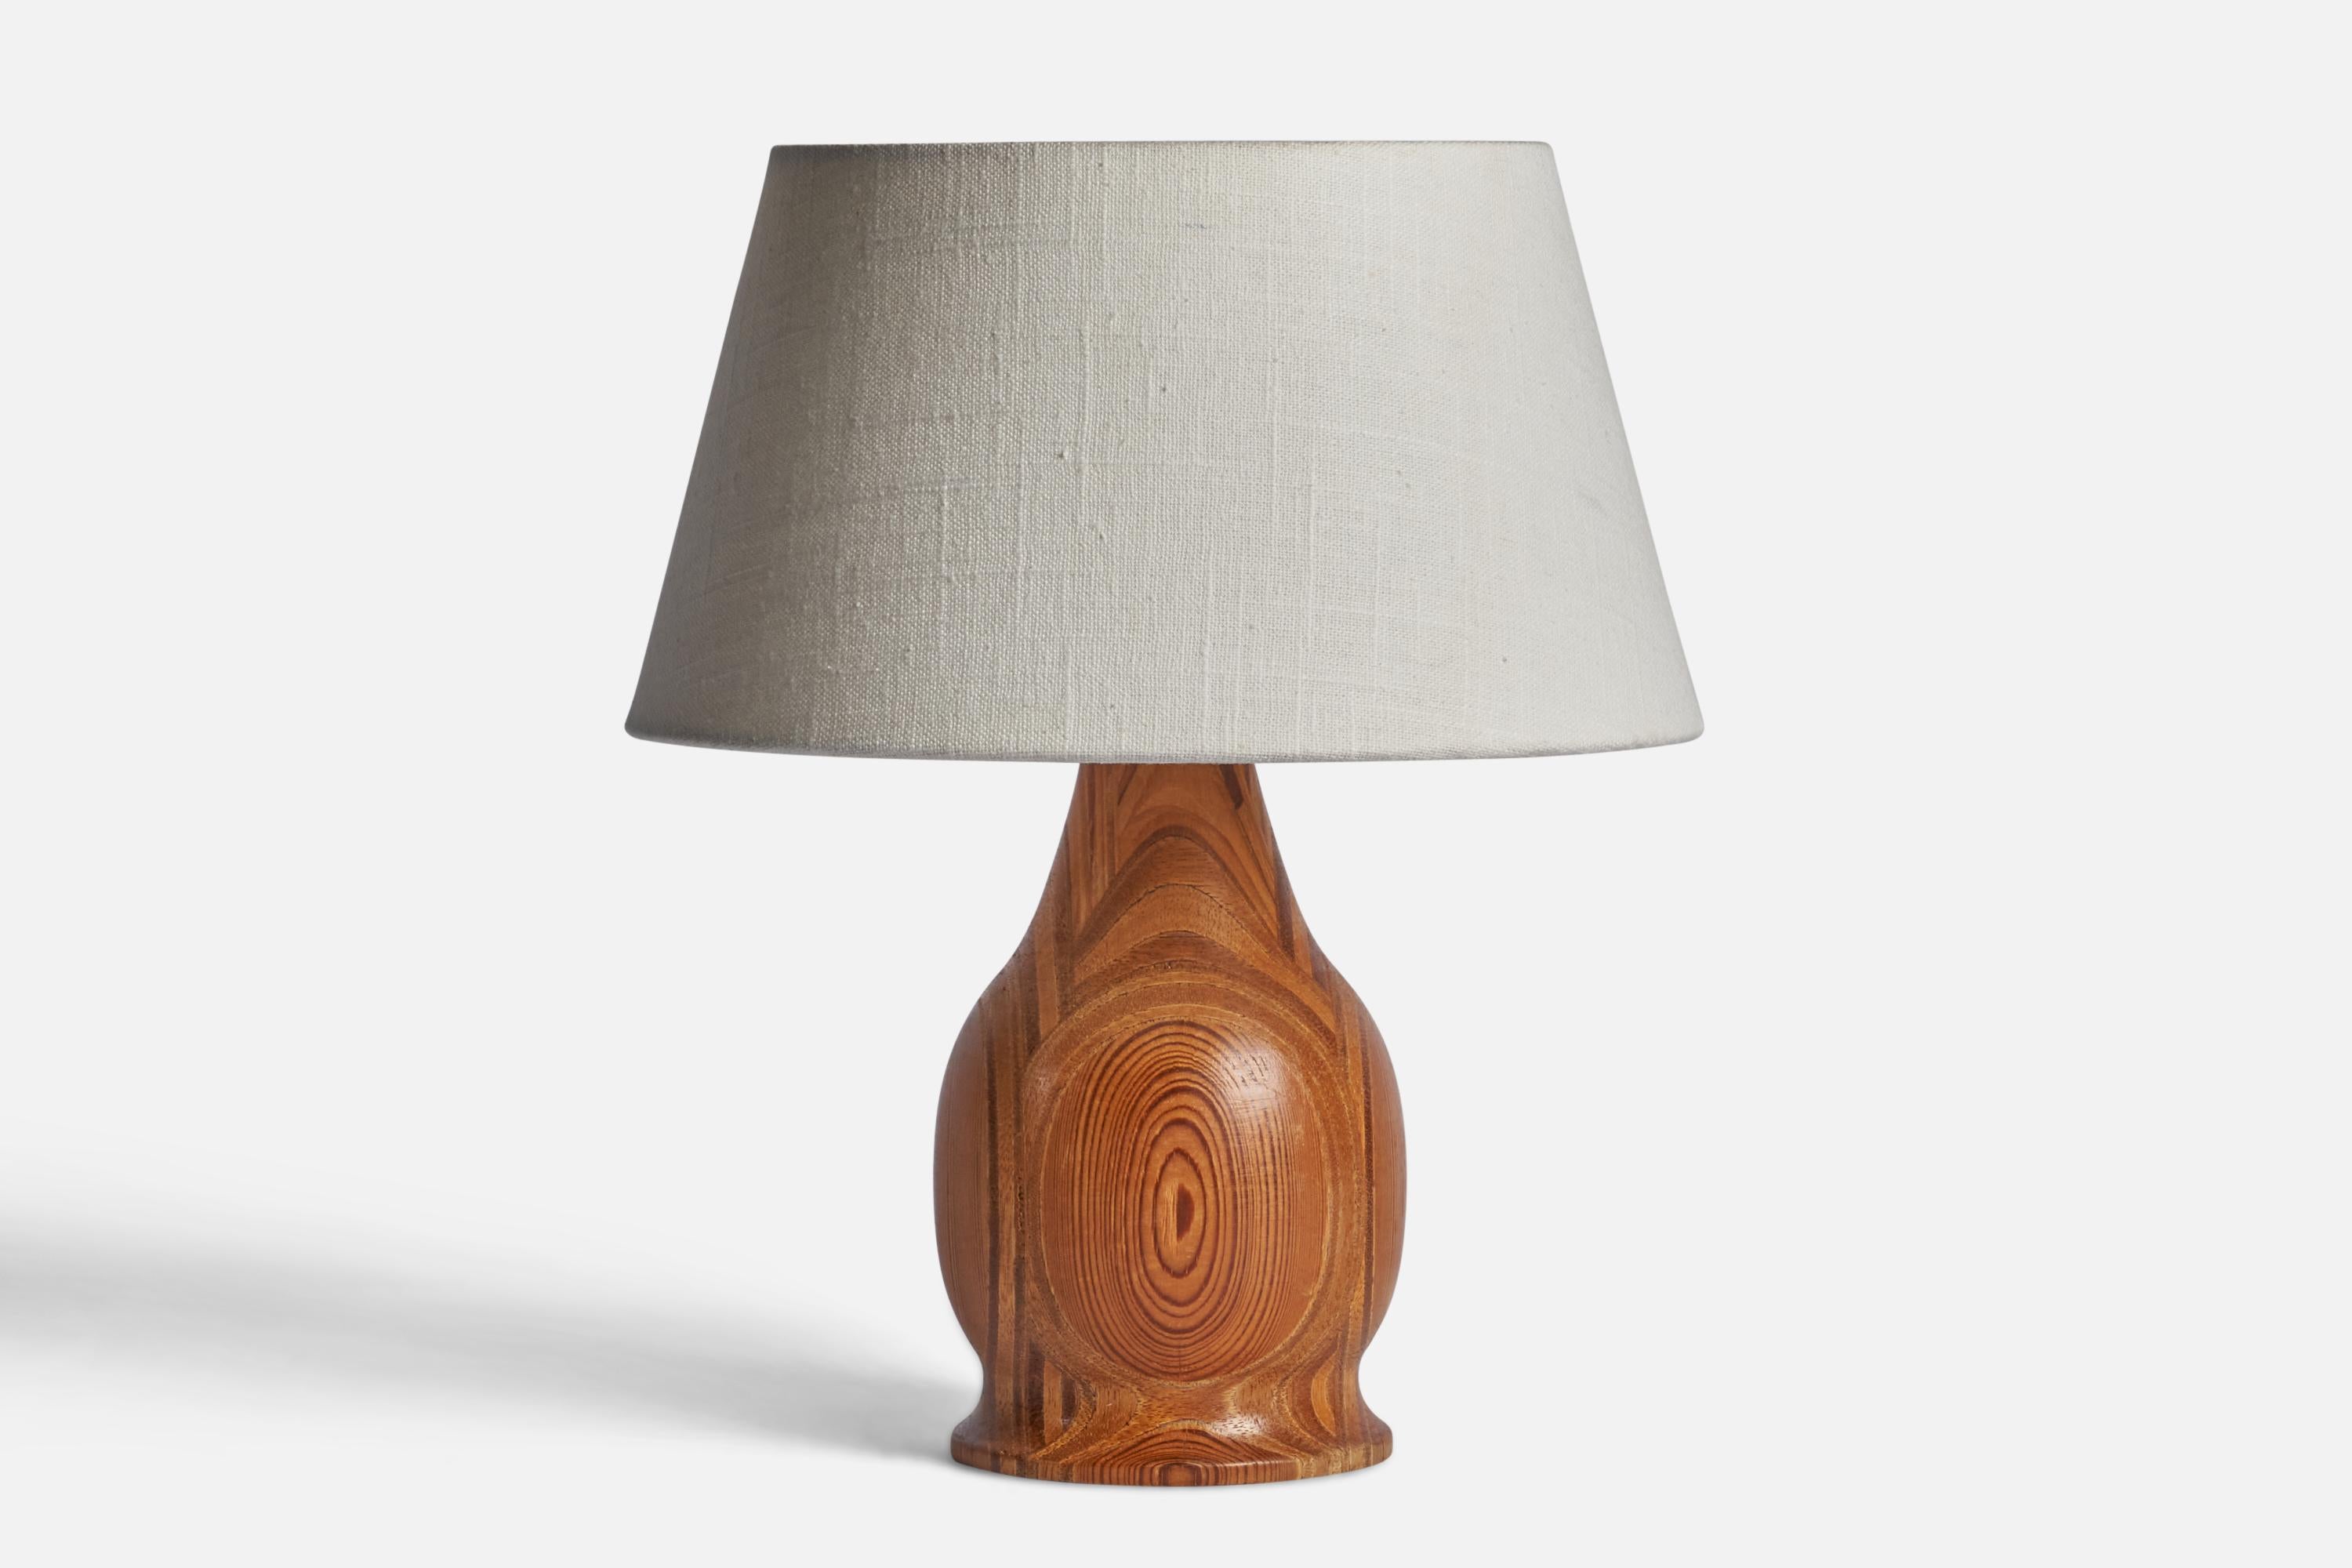 A laminated pine table lamp designed and produced in Sweden, 1970s.

Dimensions of Lamp (inches): 9.25” H x 4.25